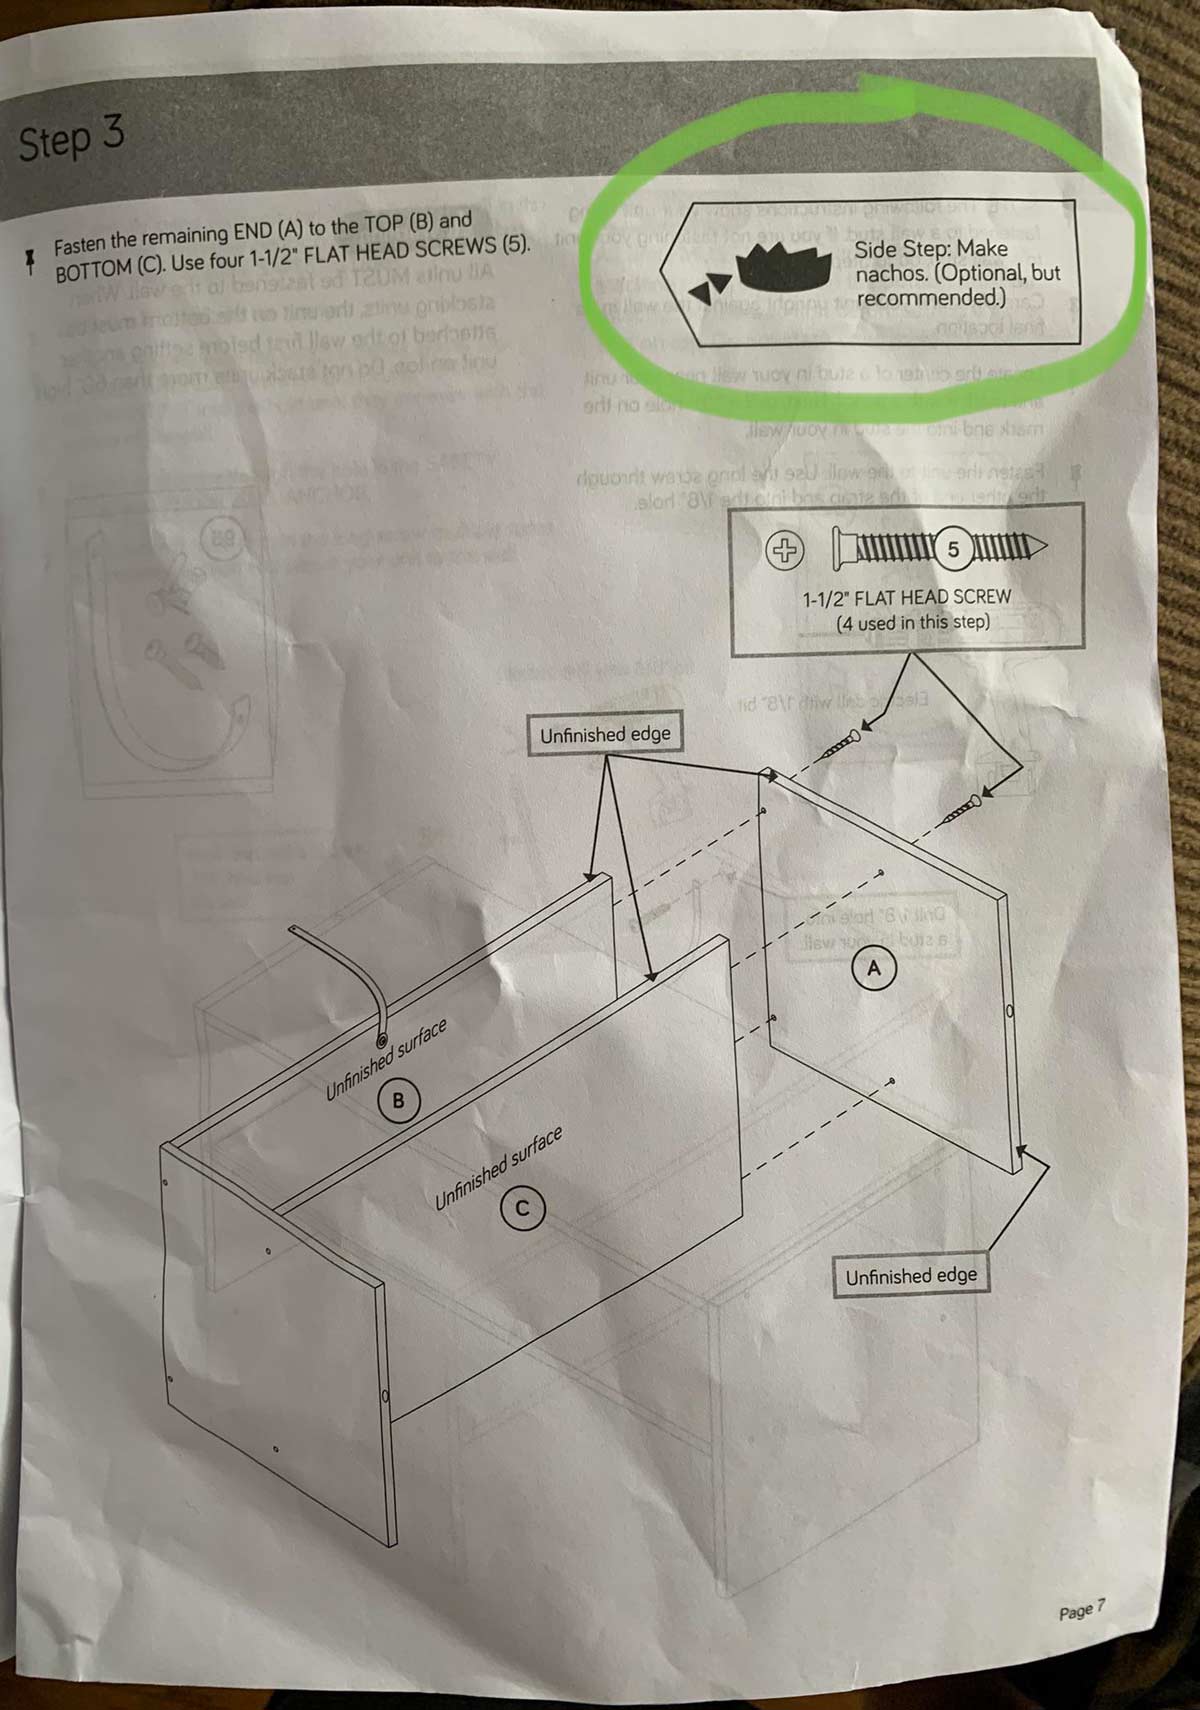 This “Side Step” in an instruction manual I got